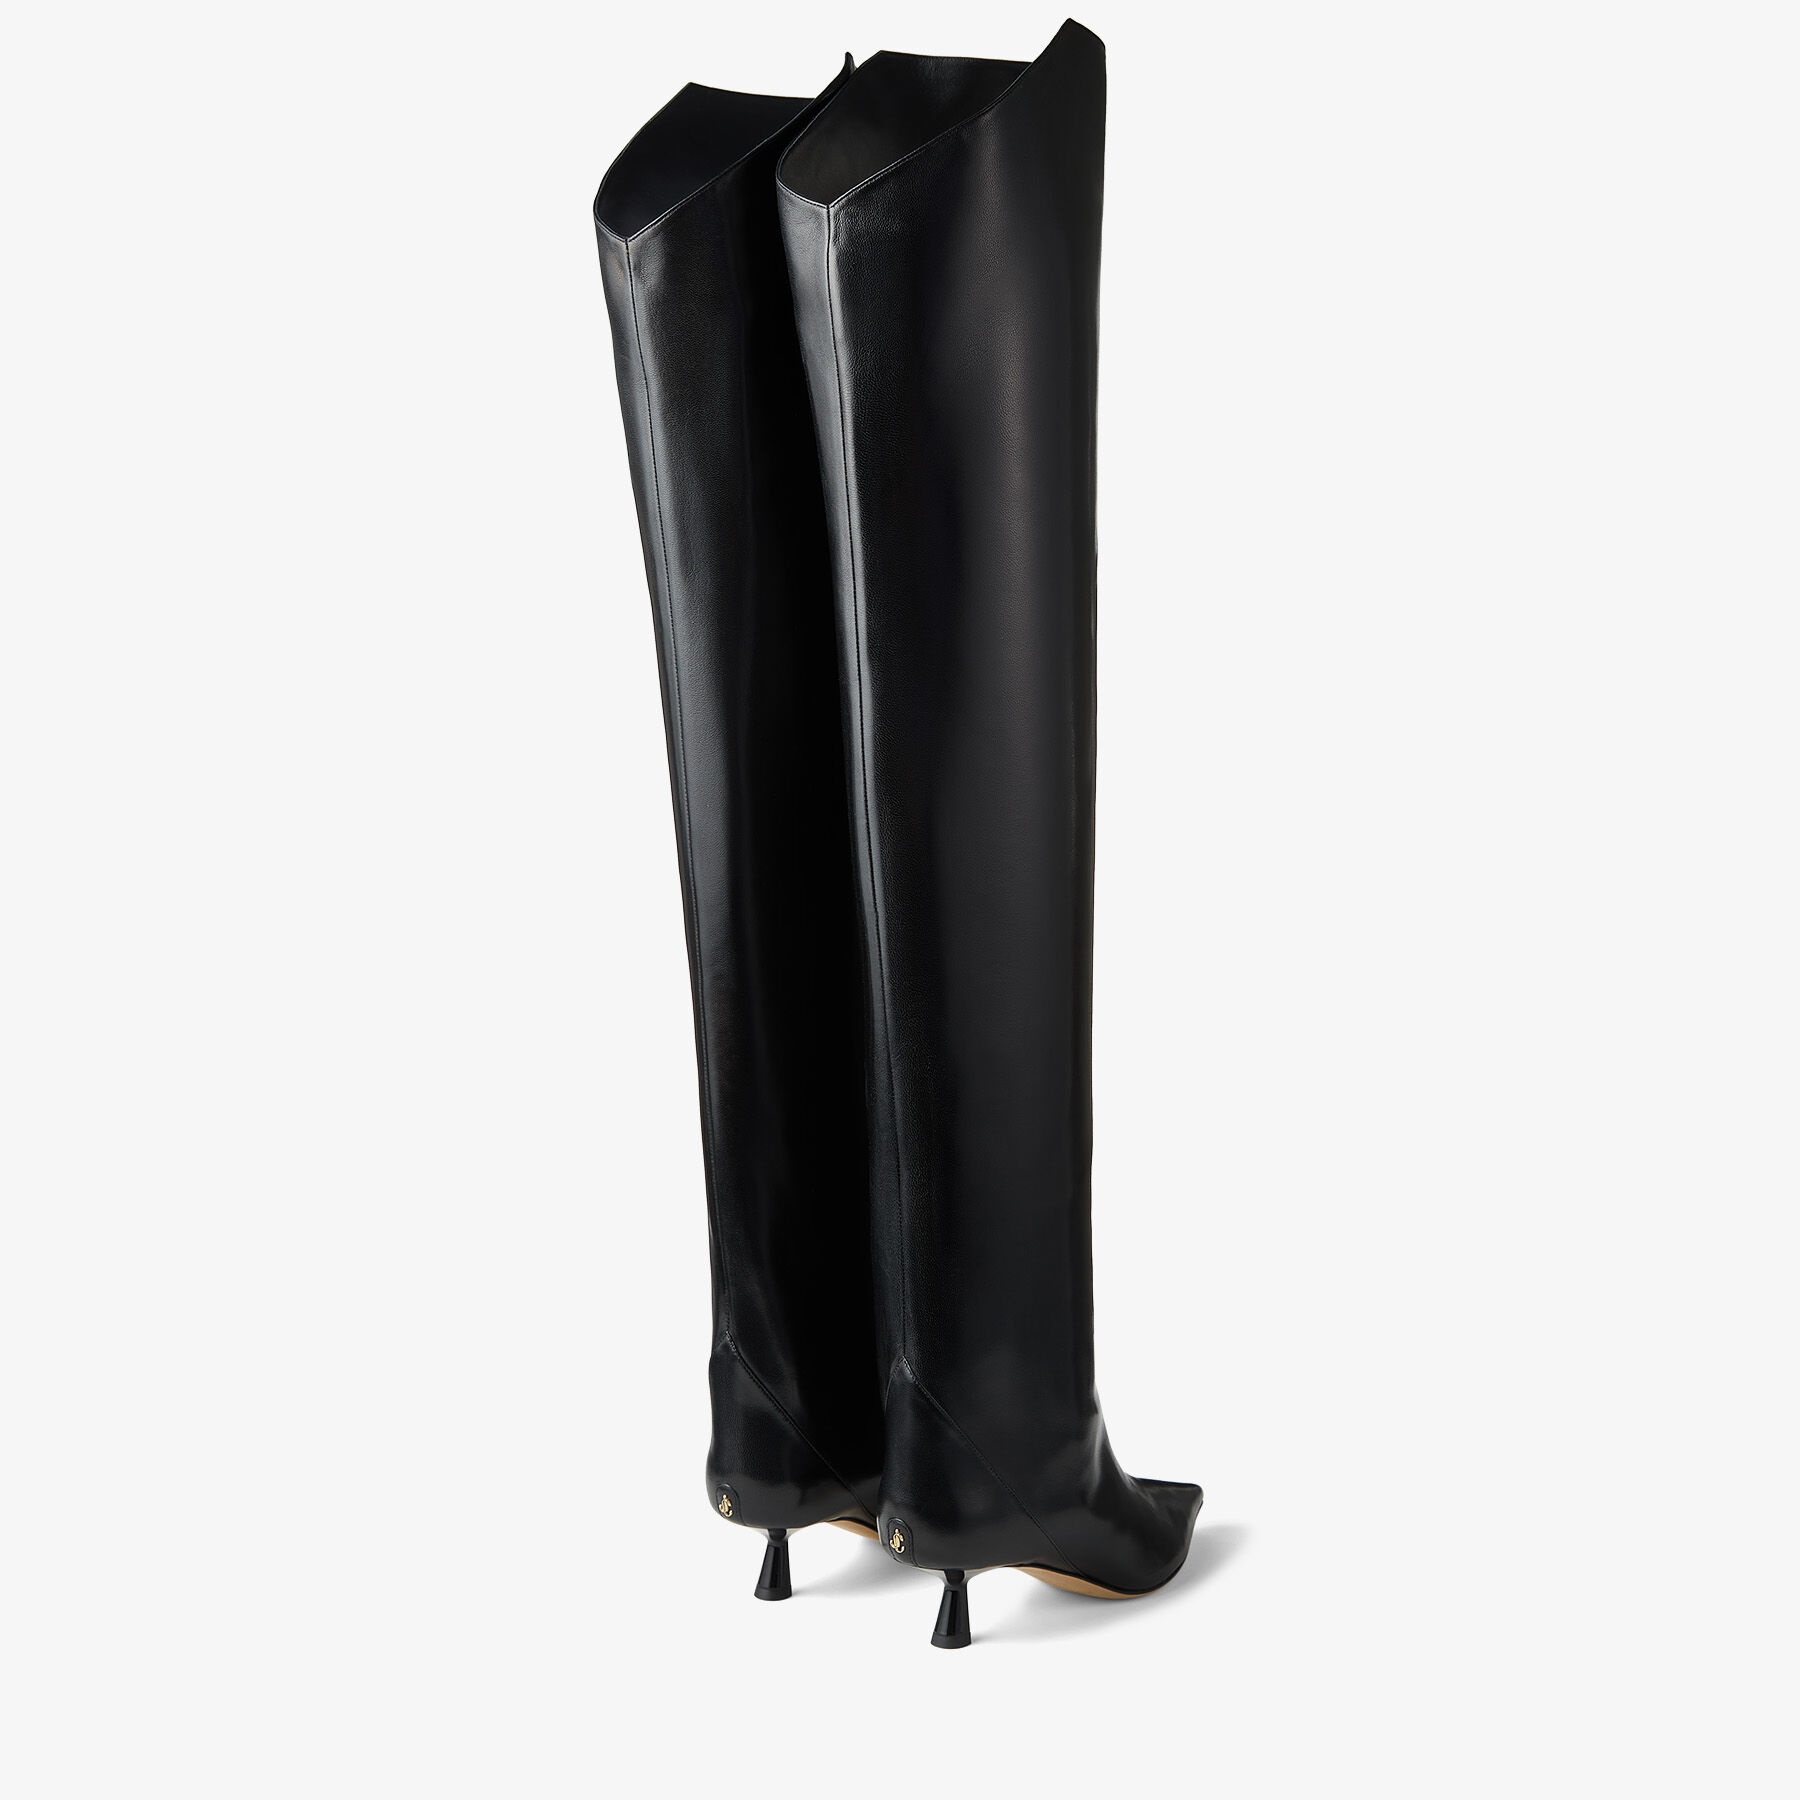 Vari 45
Black Luxe Nappa Leather Over-the-Knee Boots - 5